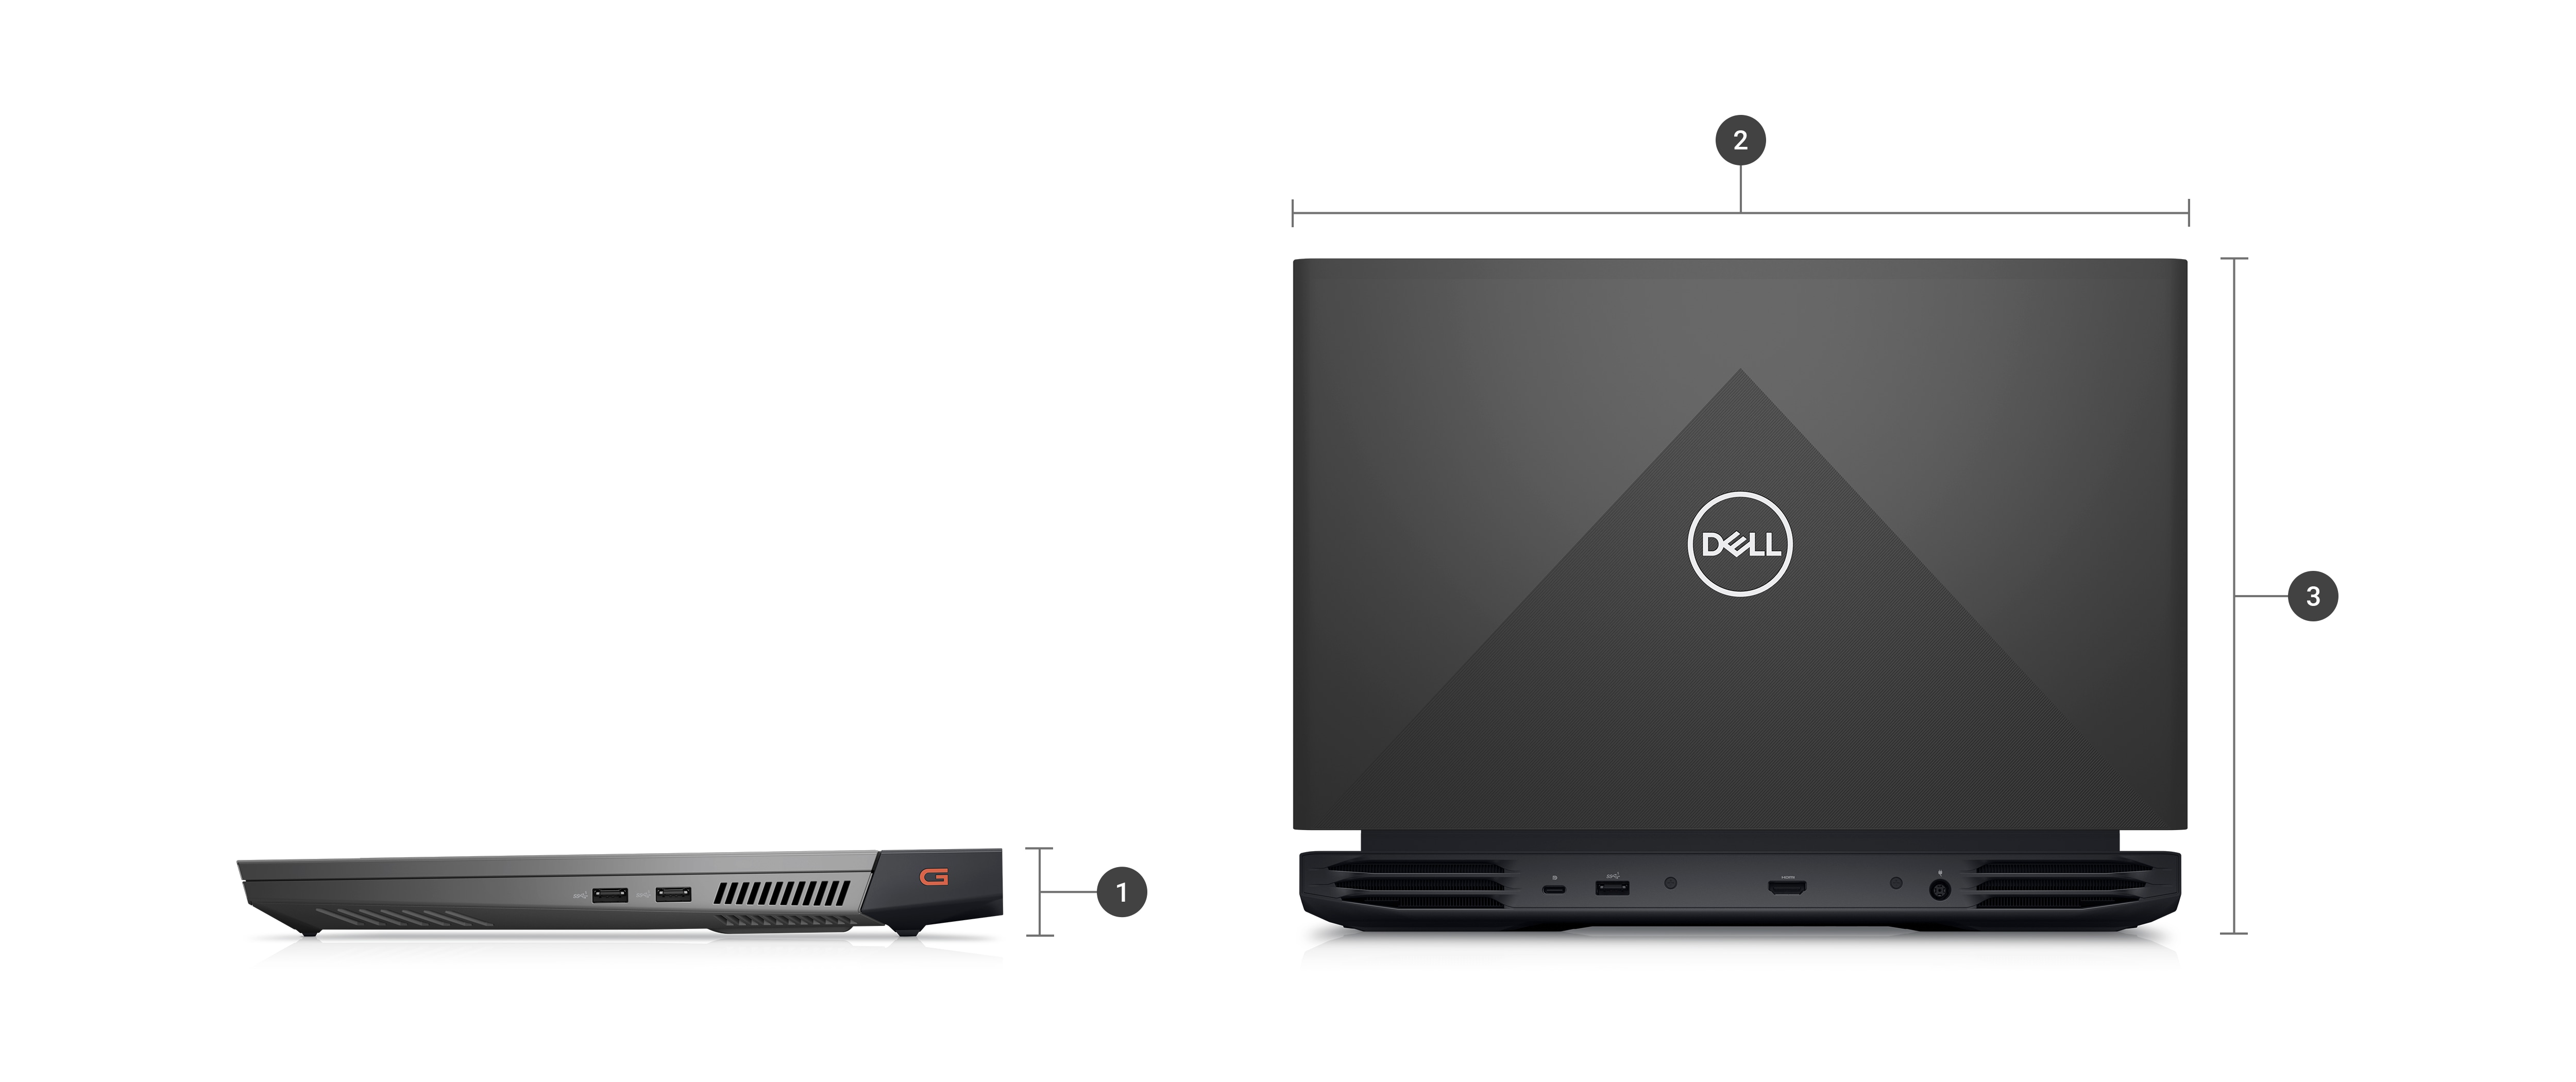 Picture of two Dell G15 5525 Gaming Laptops with numbers from 1 to 3 signaling product dimensions & weight.